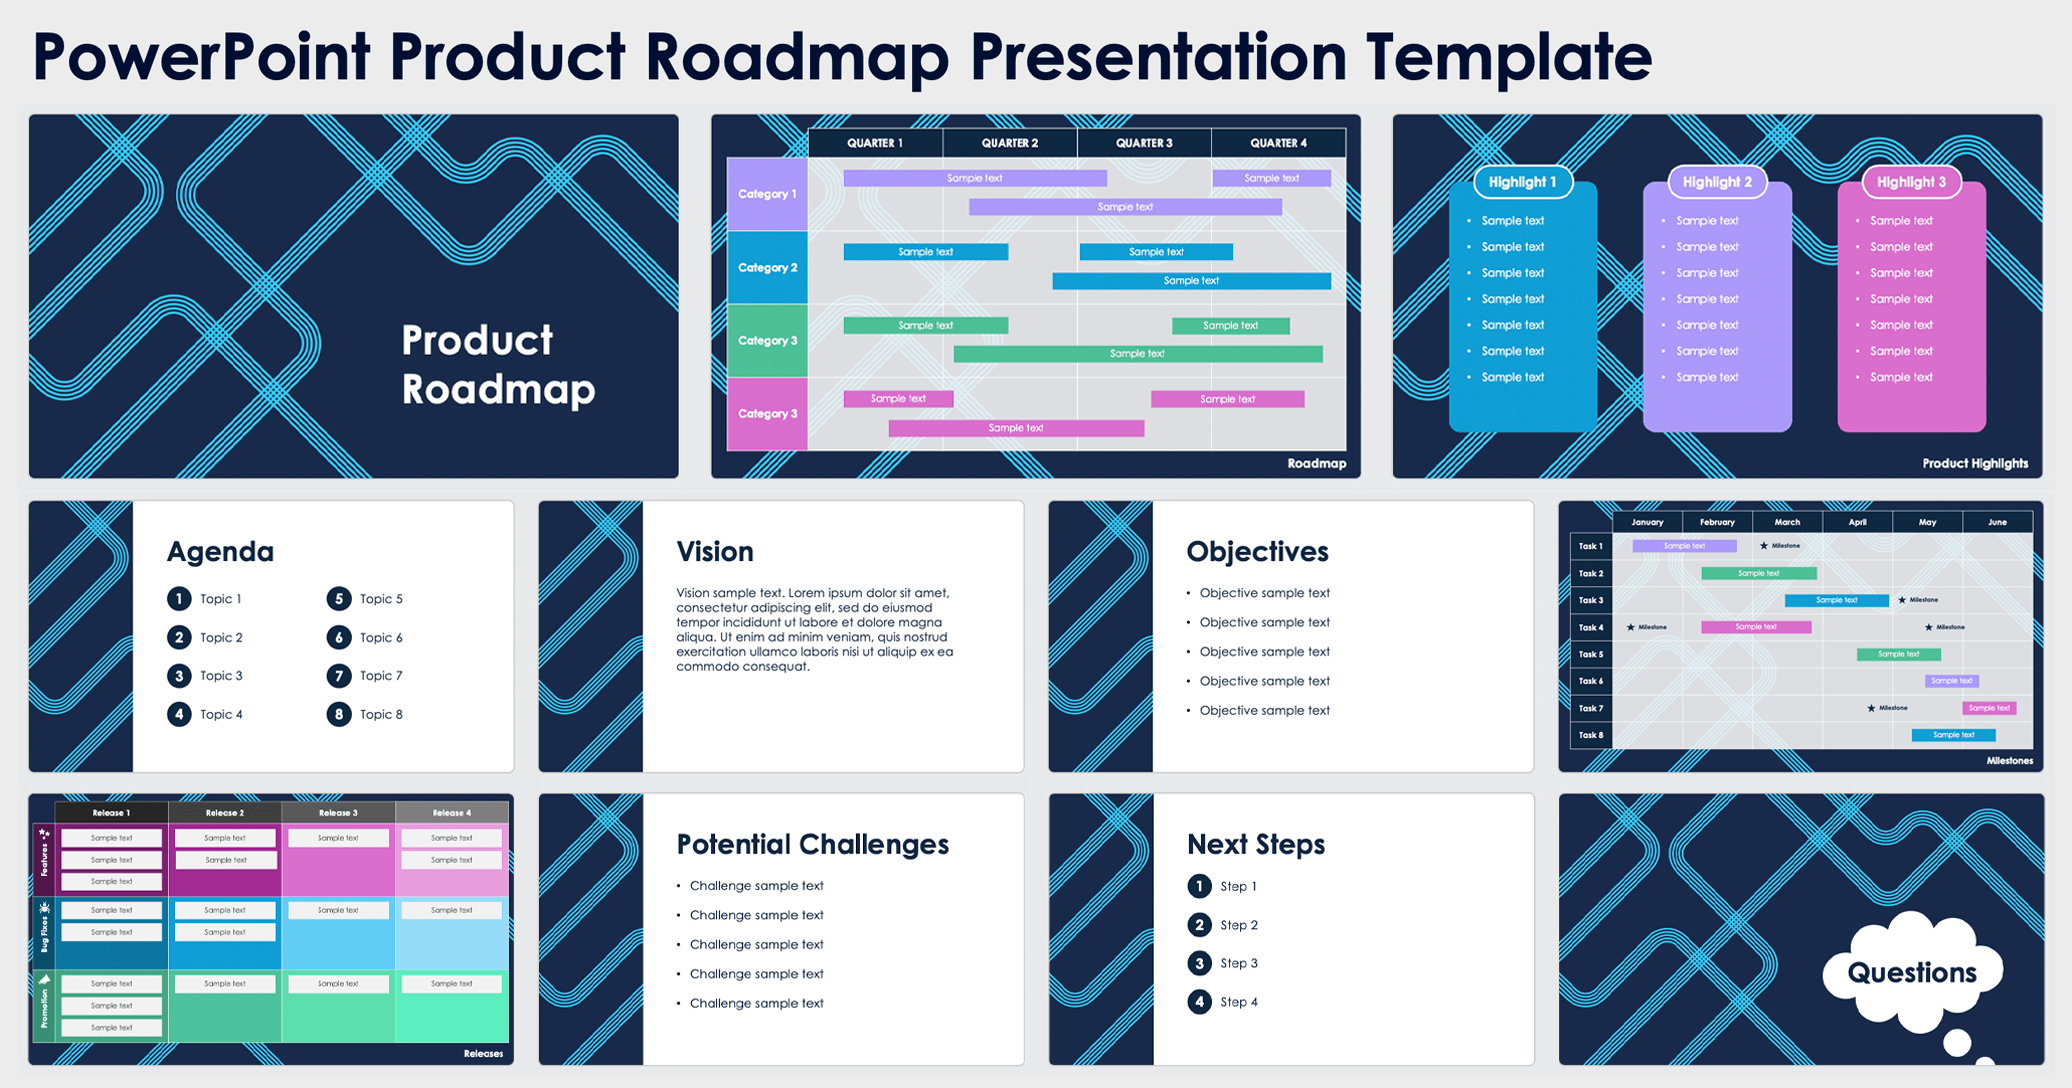 PowerPoint Product Roadmap Presentation Template